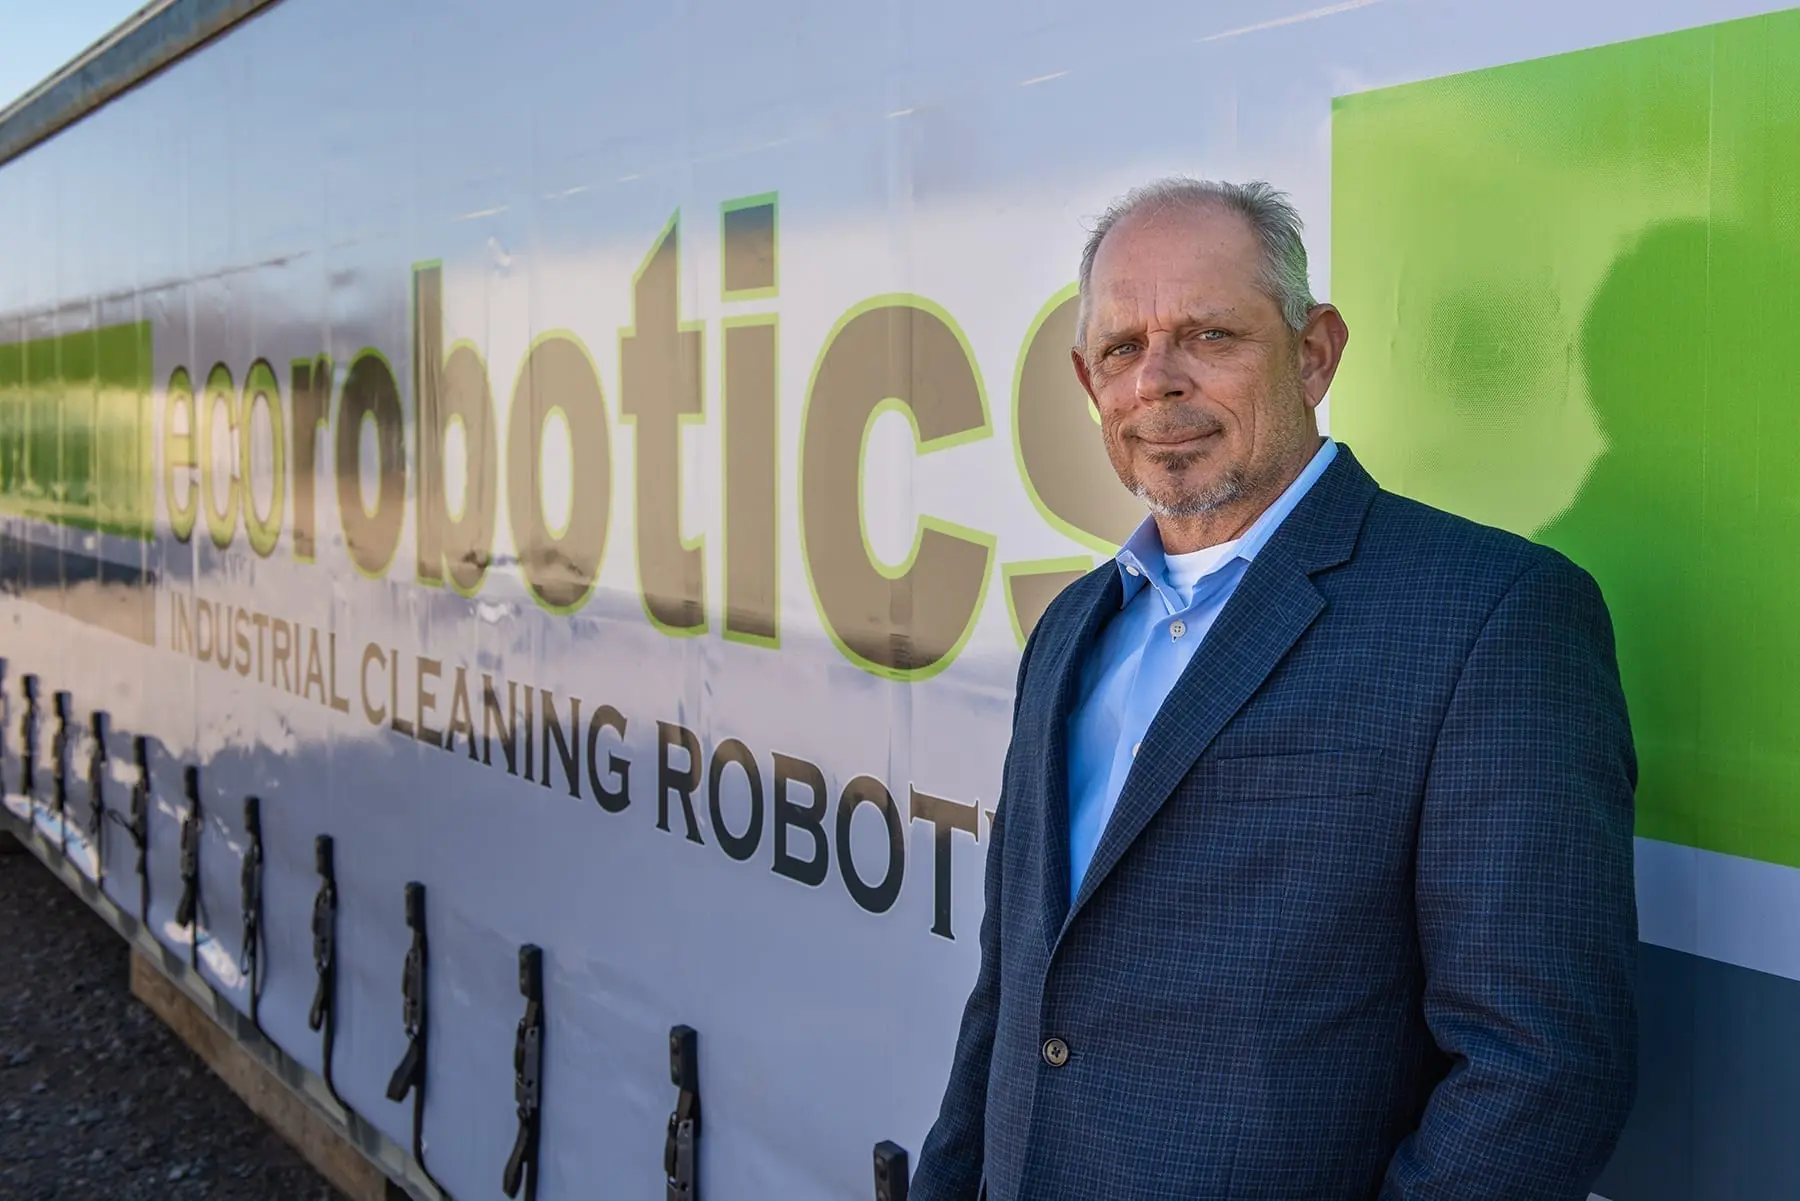 Kenny standing in front of the ecorobotics logo